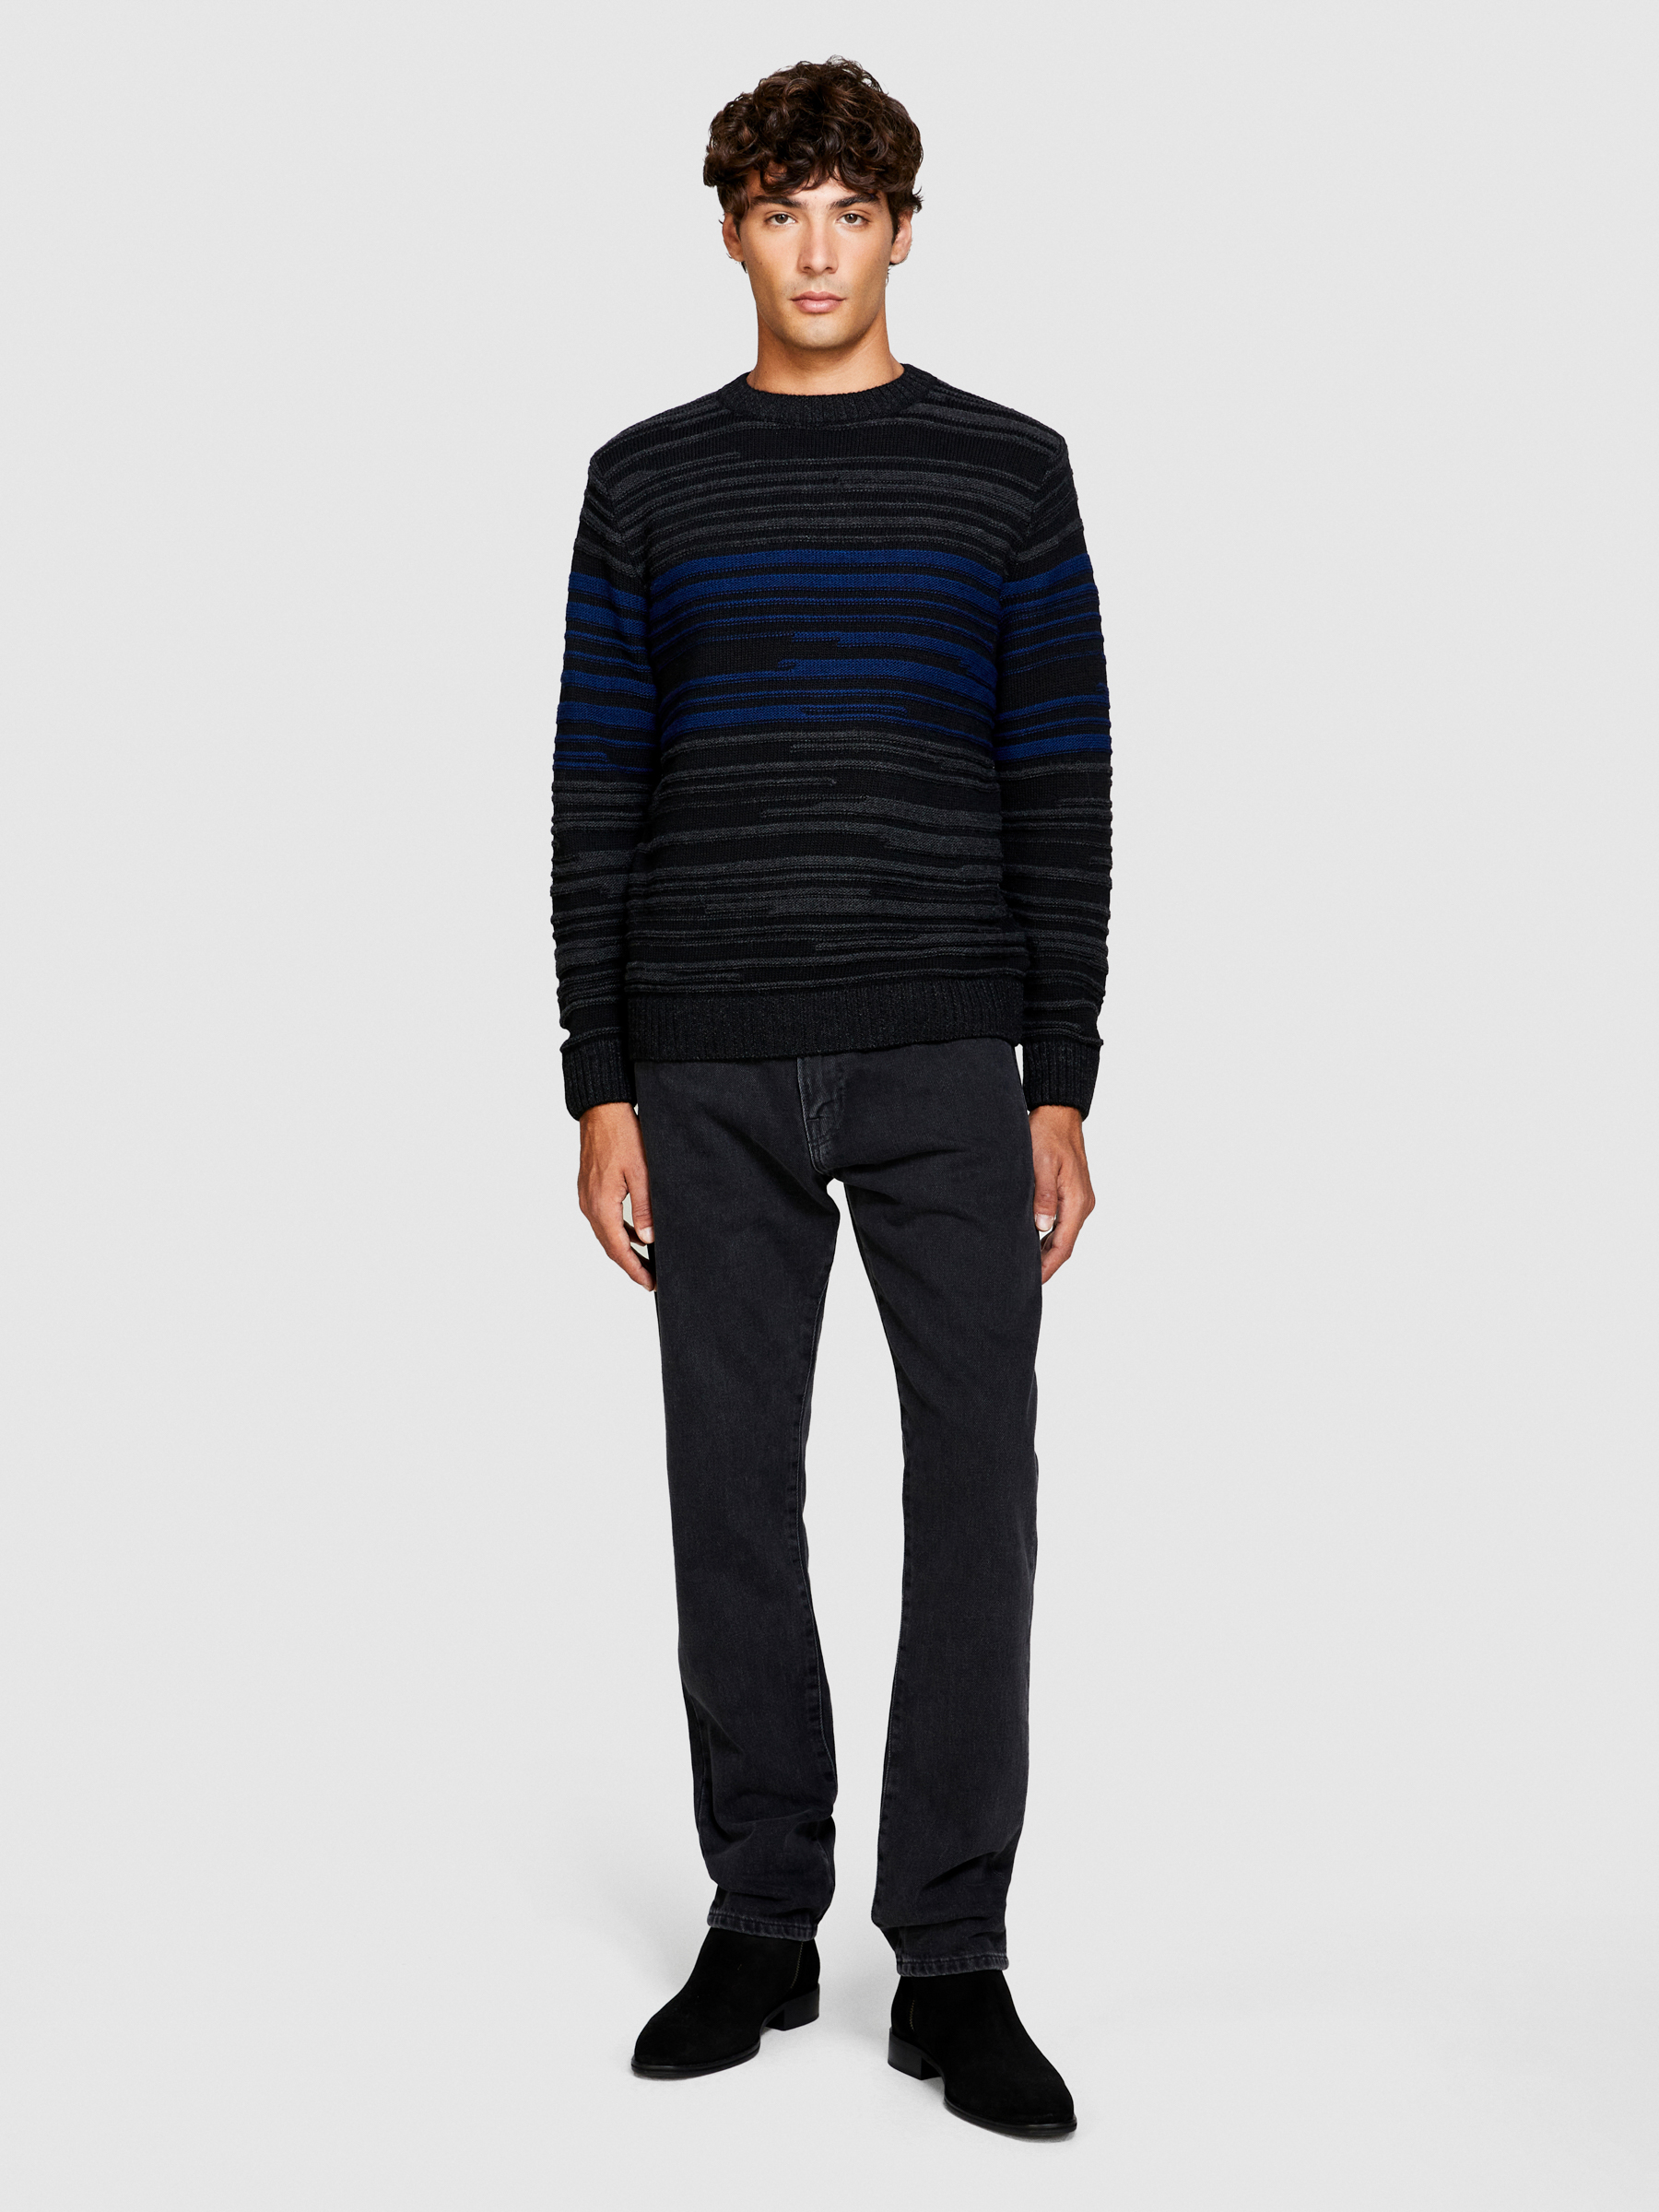 Sisley - Sweater With Stripes, Man, Multi-color, Size: M